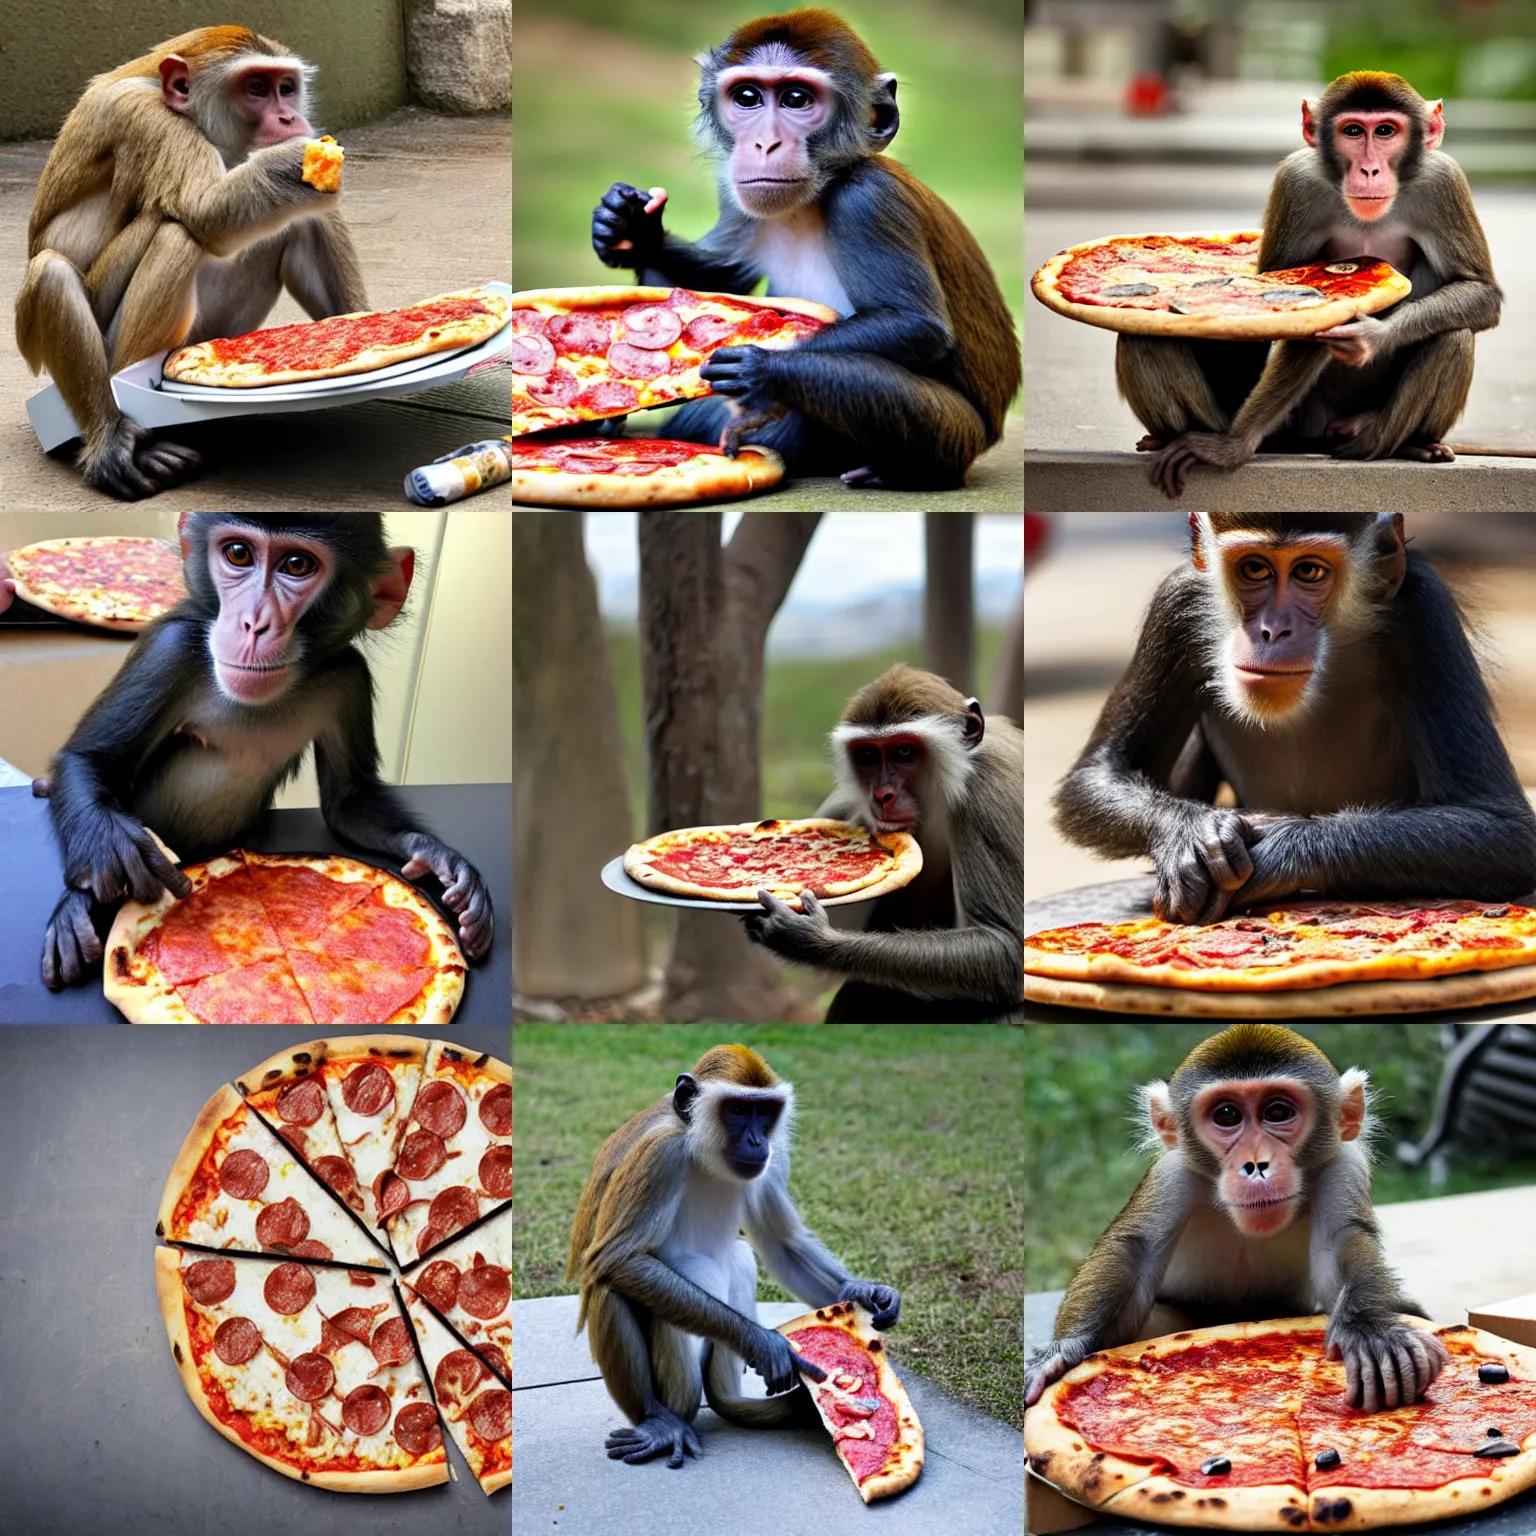 Prompt: a monkey eating a pizza